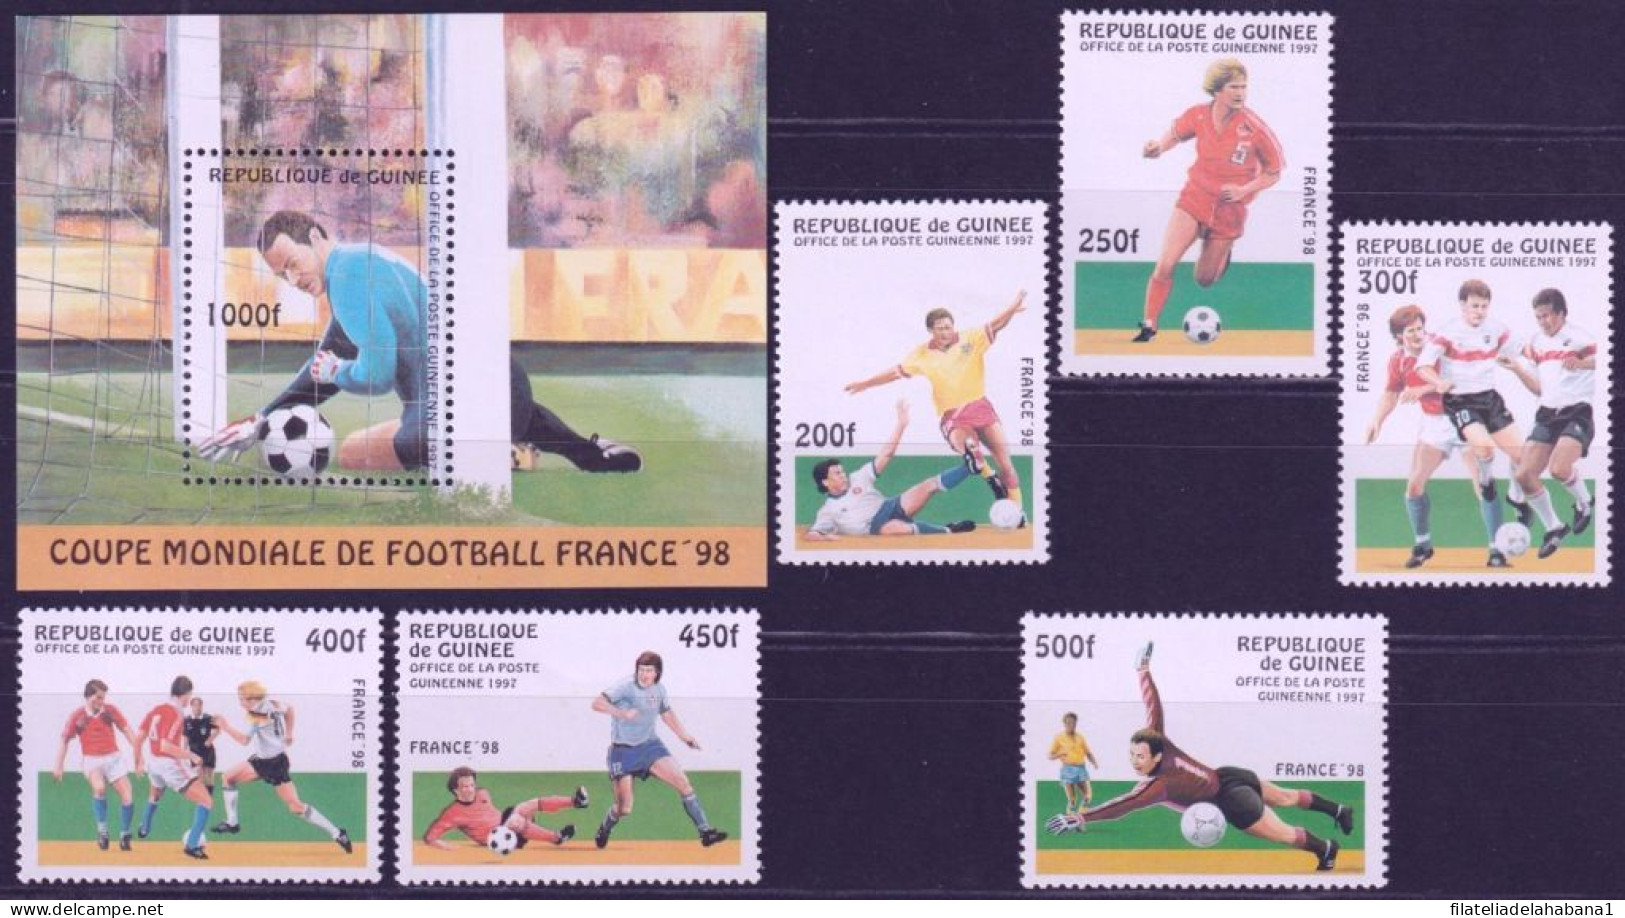 F-EX50299 GUINEA GUINEE MNH 1997 WORLD SOCCER CUP CHAMPIONSHIP.  - Unused Stamps